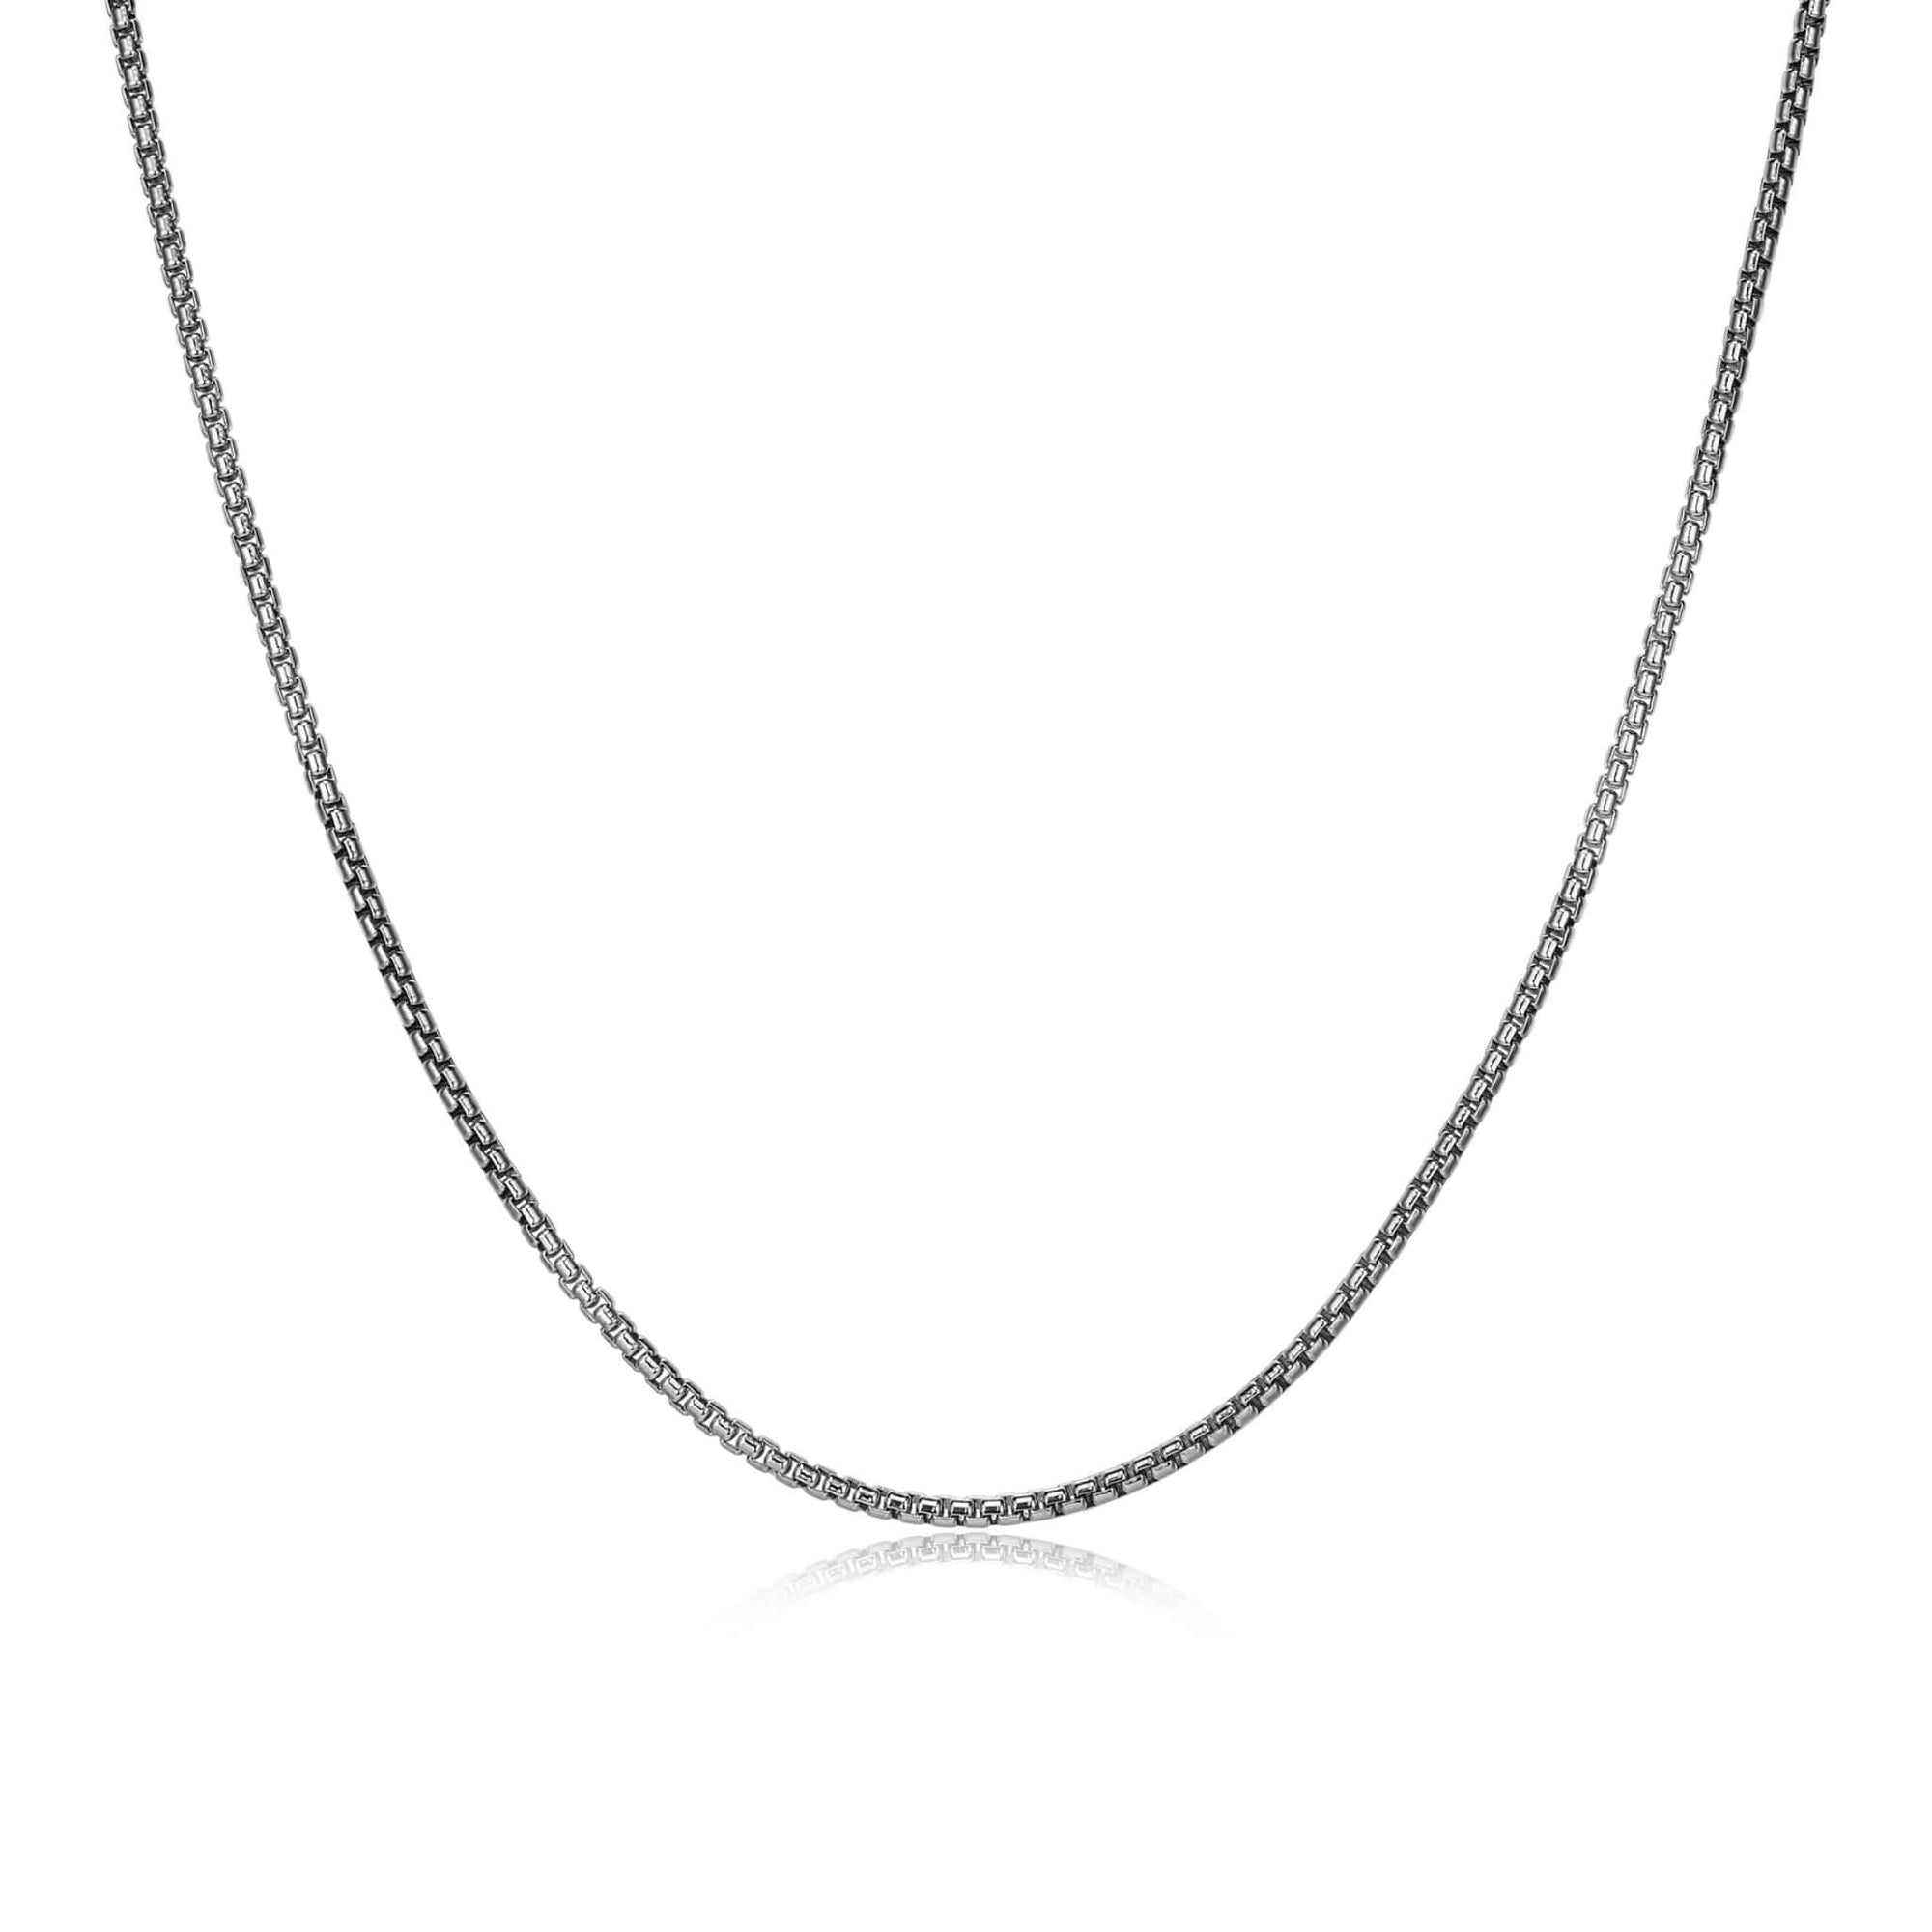 ETHOS Gunmetal Silver Round Box Chain Necklace at Arman's Jewellers Kitchener